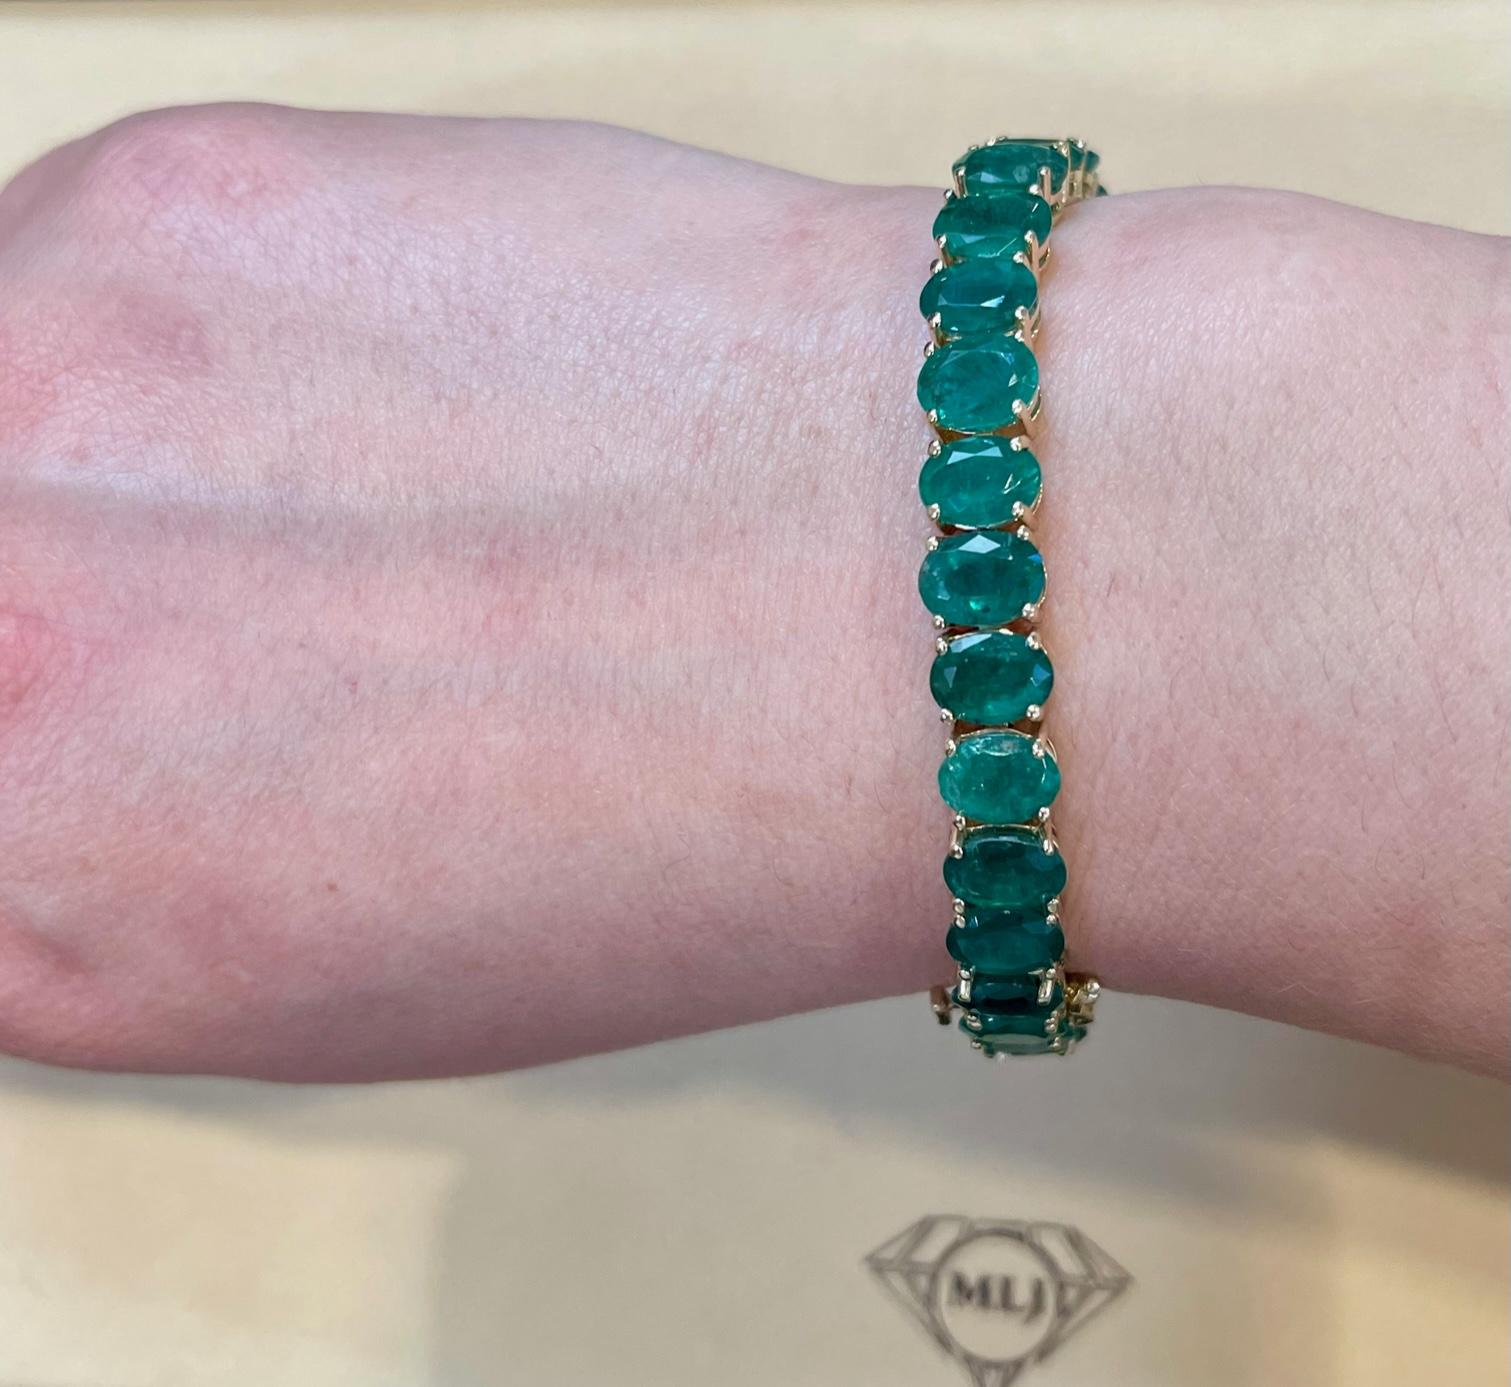  This exceptionally Beautiful Tennis  bracelet has 30 stones of oval  Emeralds  .  Total weight of the Emeralds is  approximately 40 carat. 
The bracelet is expertly crafted with 22.12  grams of  14 karat Yellow  gold .including the stones. Have a